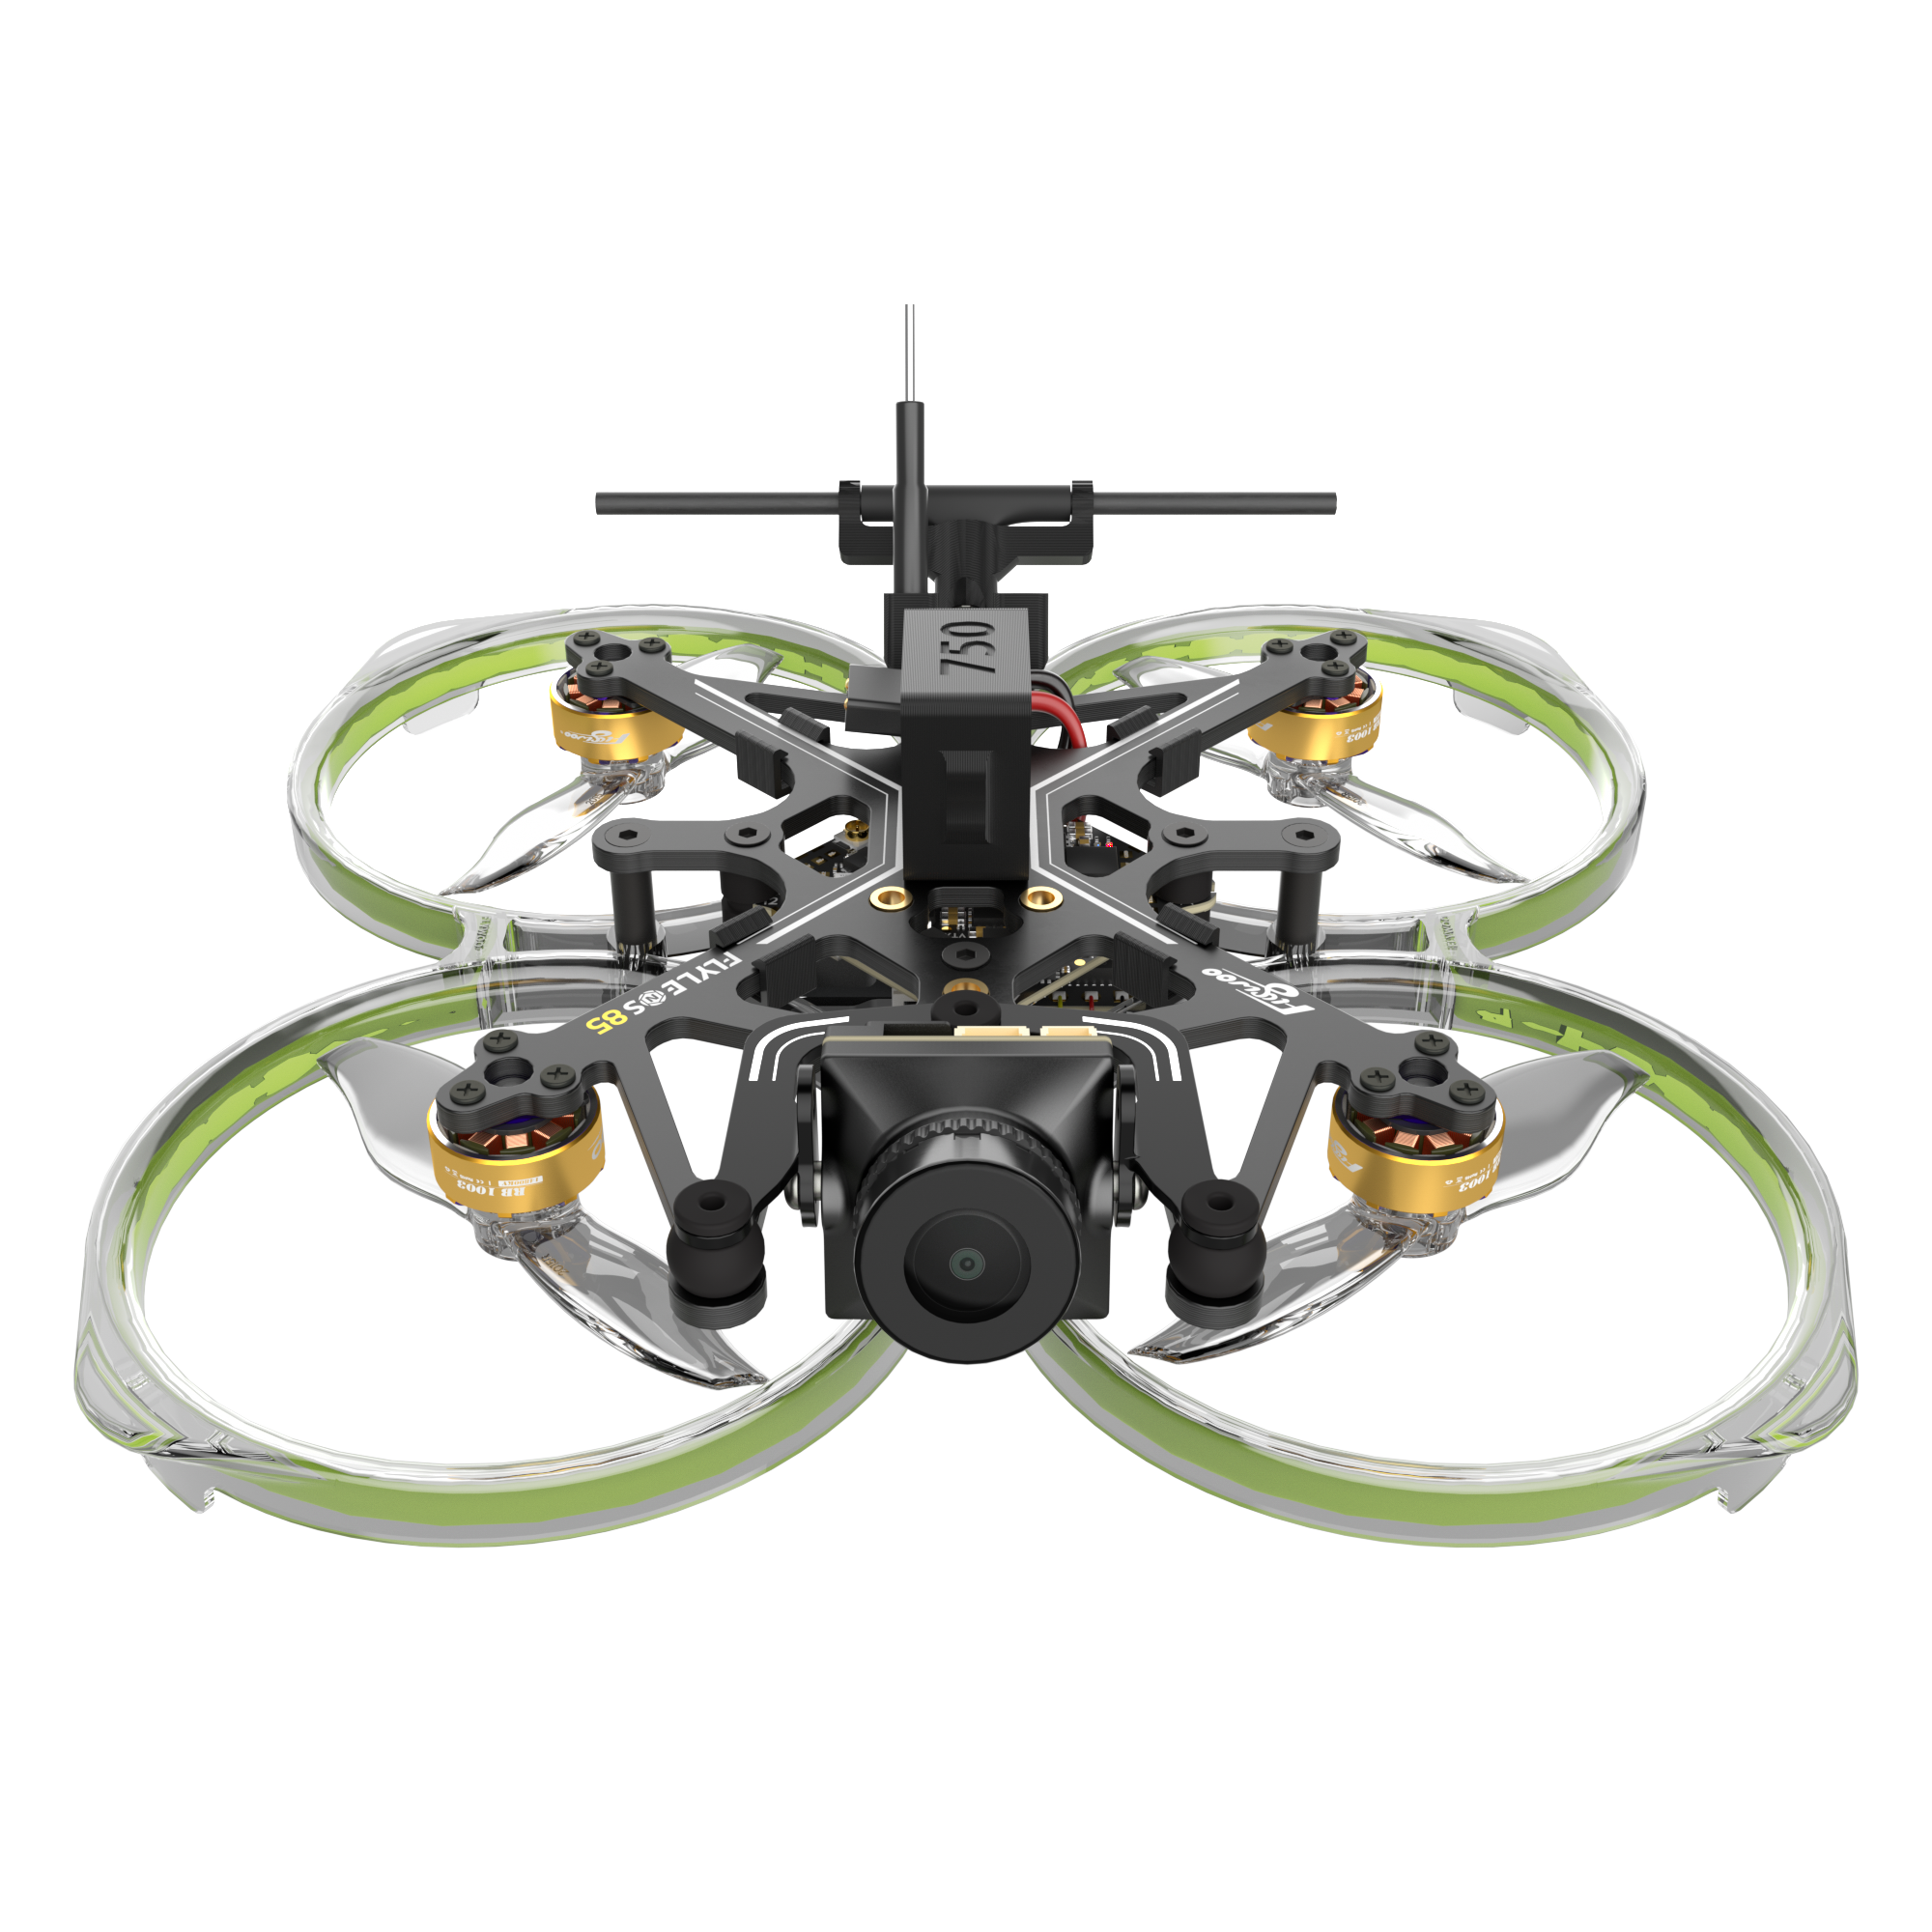 storm Surroundings mixture Shop Flywoo: Your Go-To for High-Quality Drones & Accessories